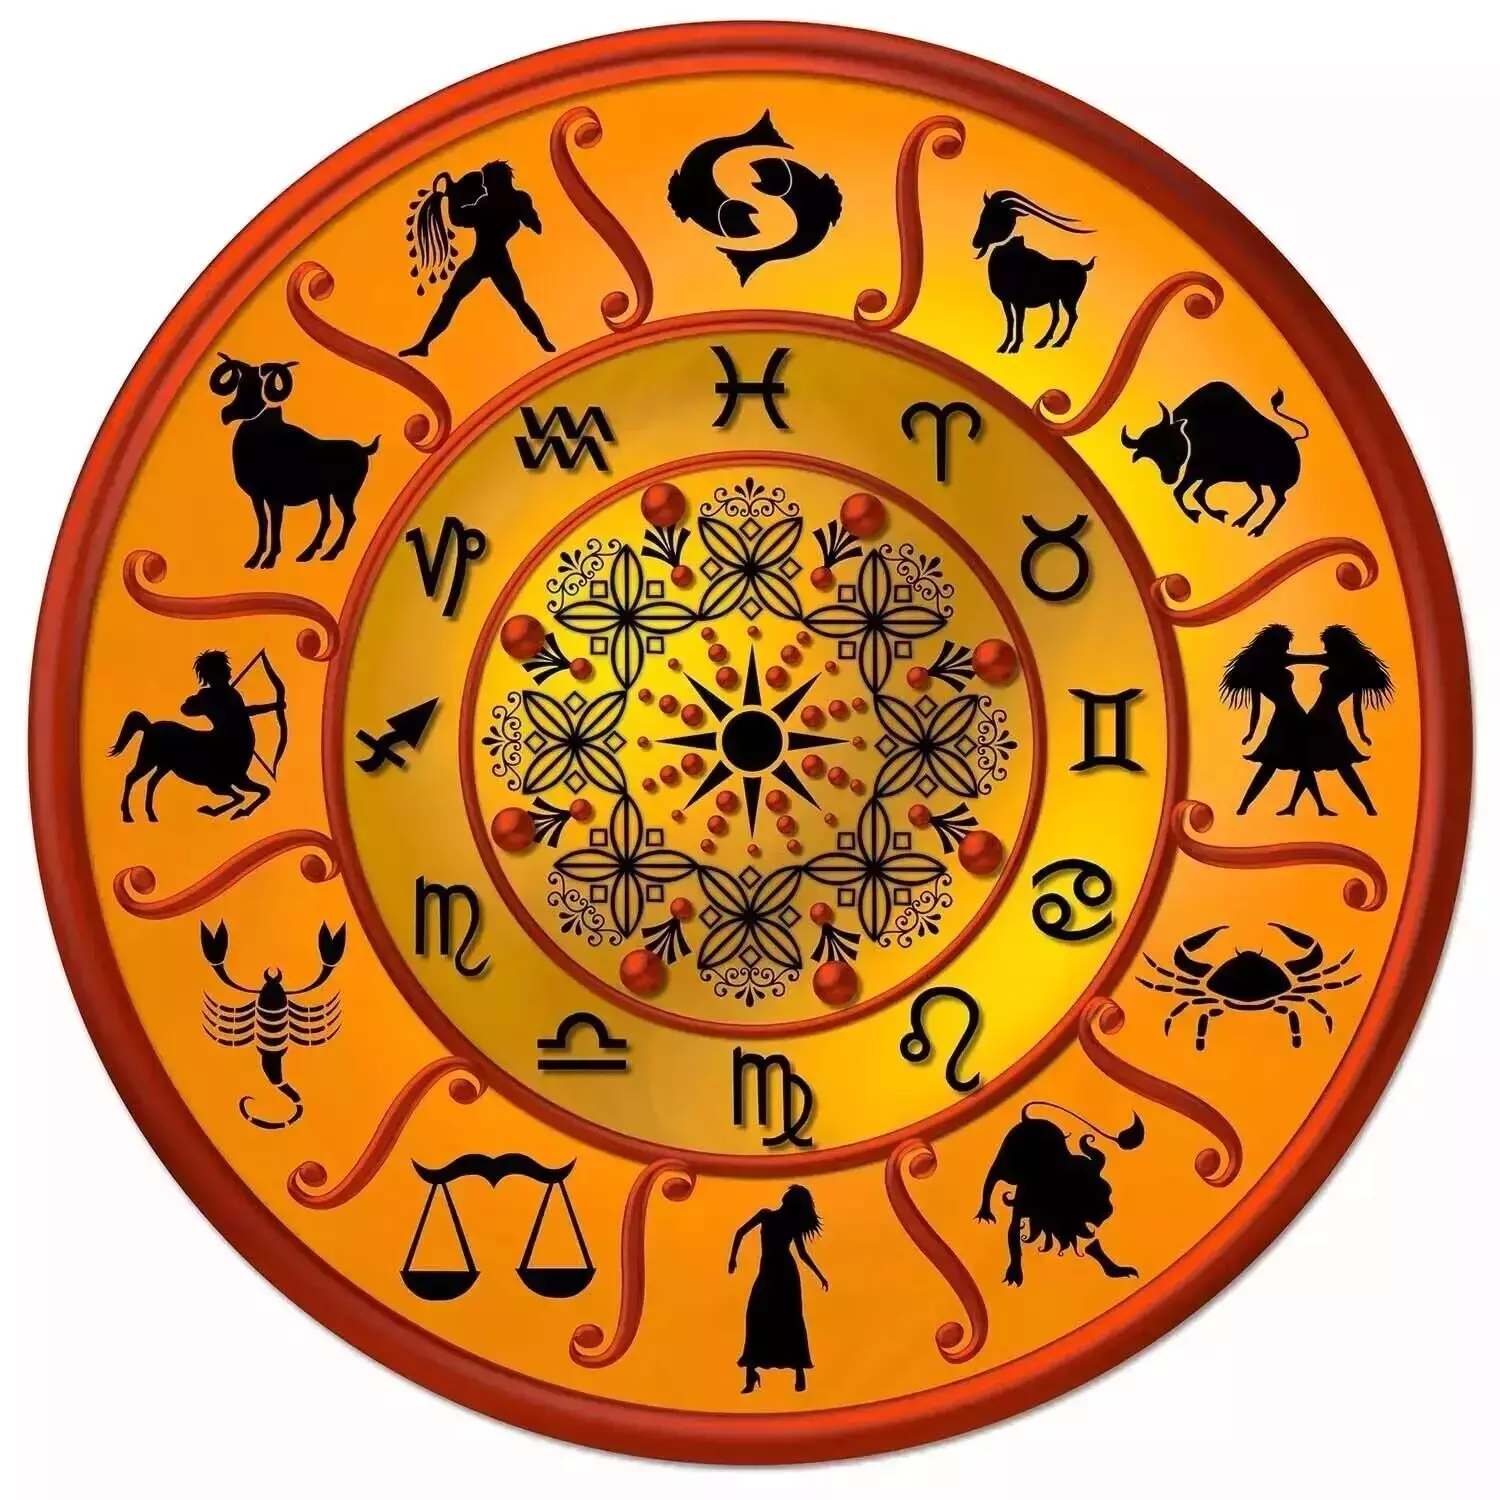 08  April  – Know your todays horoscope